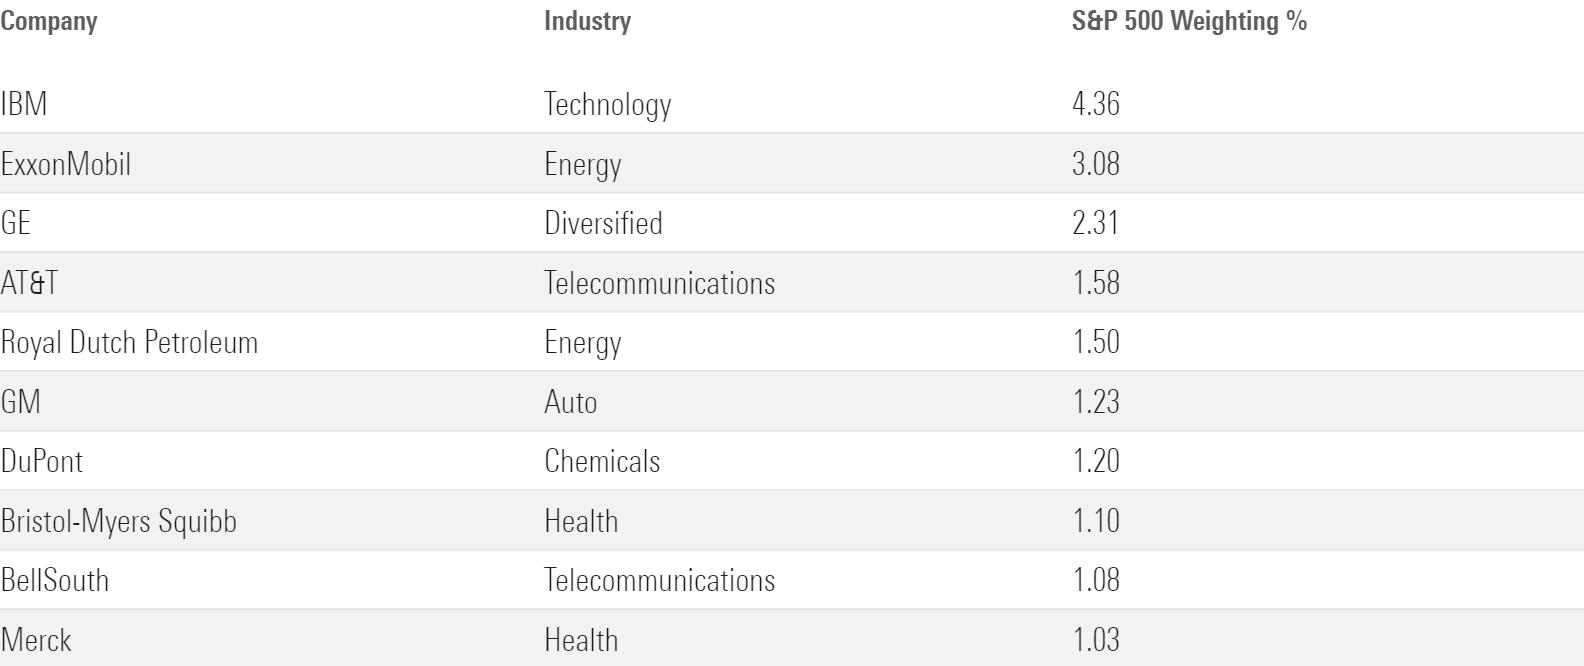 Table showing the top 10 constituents of the S&P 500 at the end of 1986